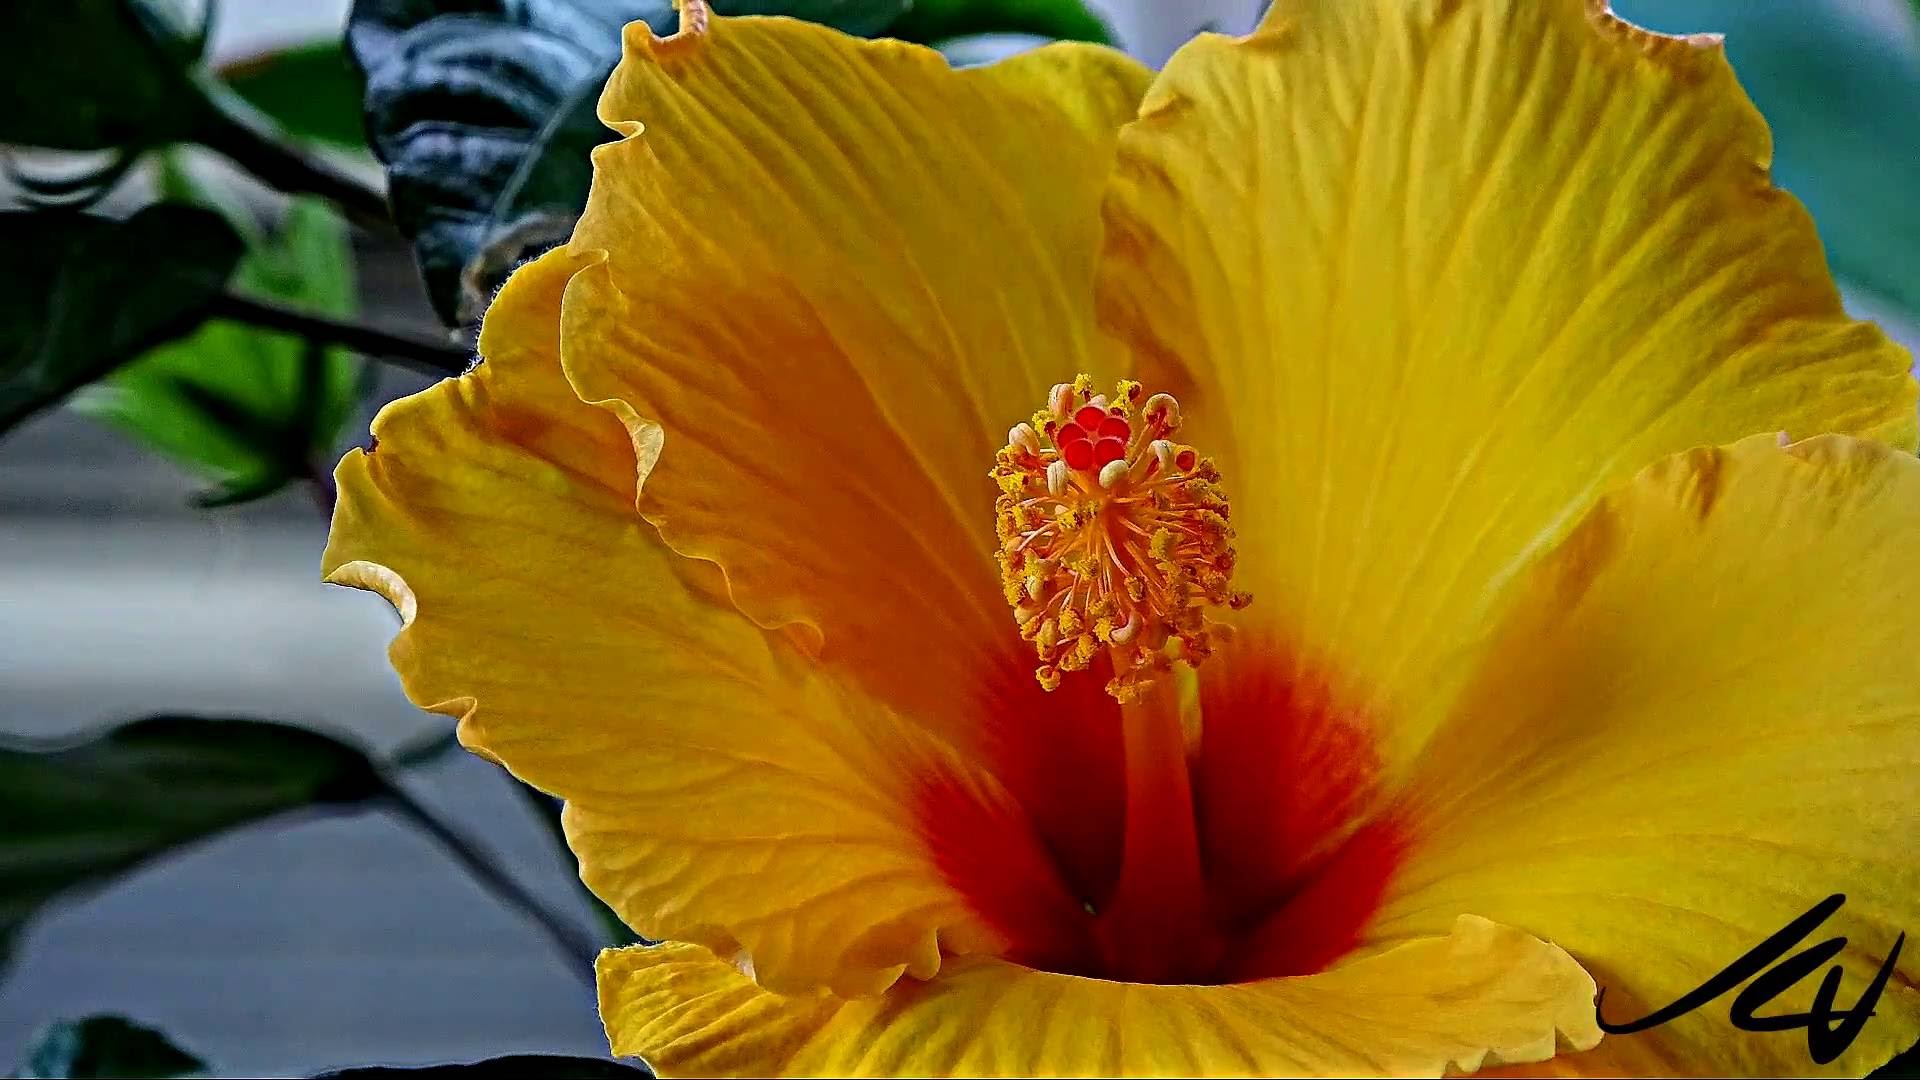 Hibiscus flower opening and closing - Timelapse Sony 4k FDR AX53 ...